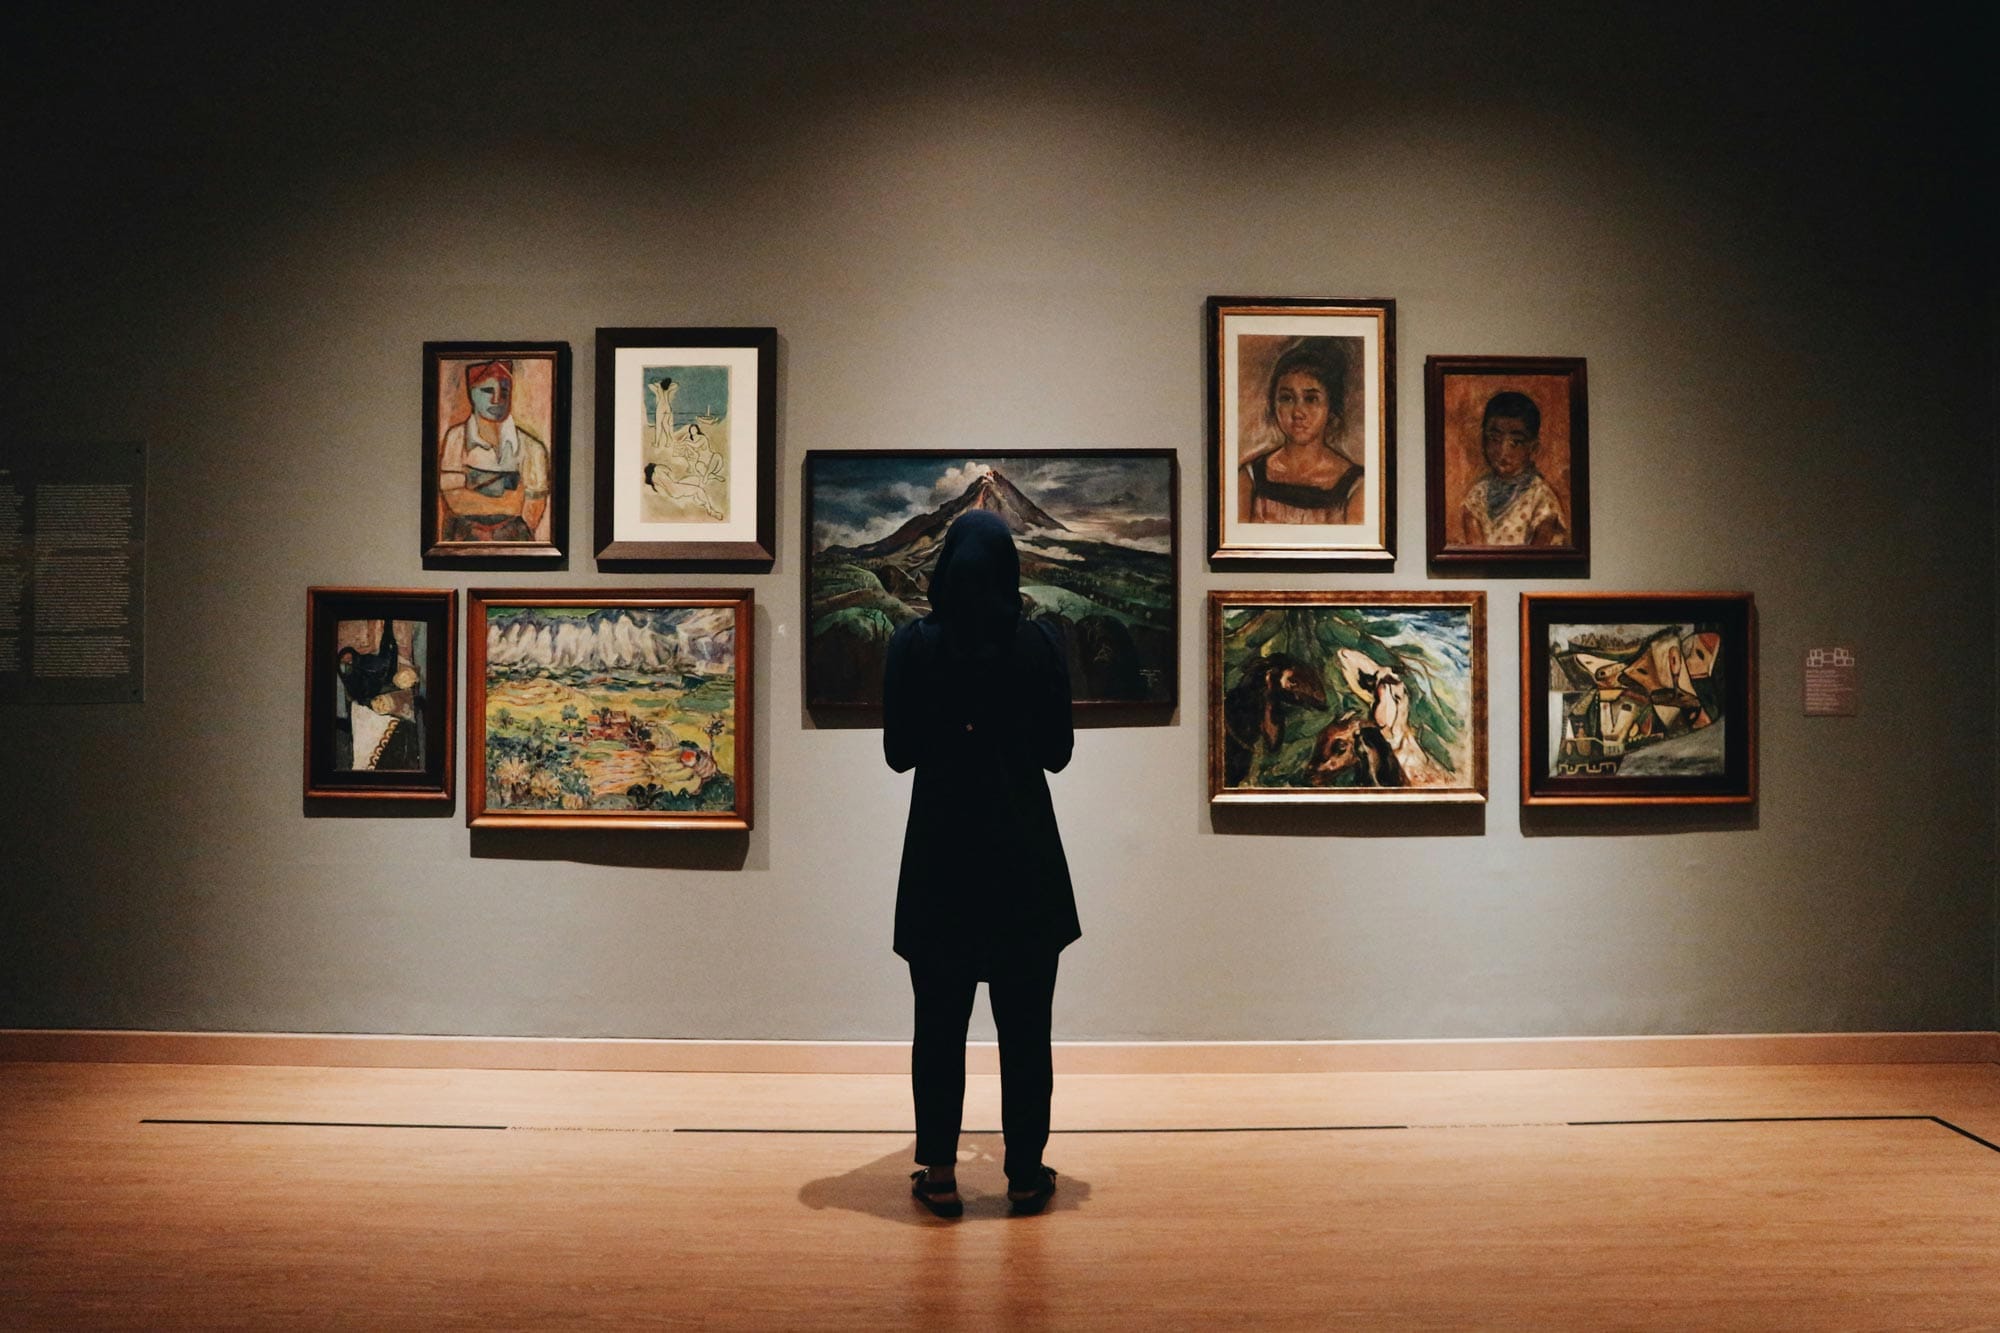 A person standing in front of a gallery wall with art works hung on it.